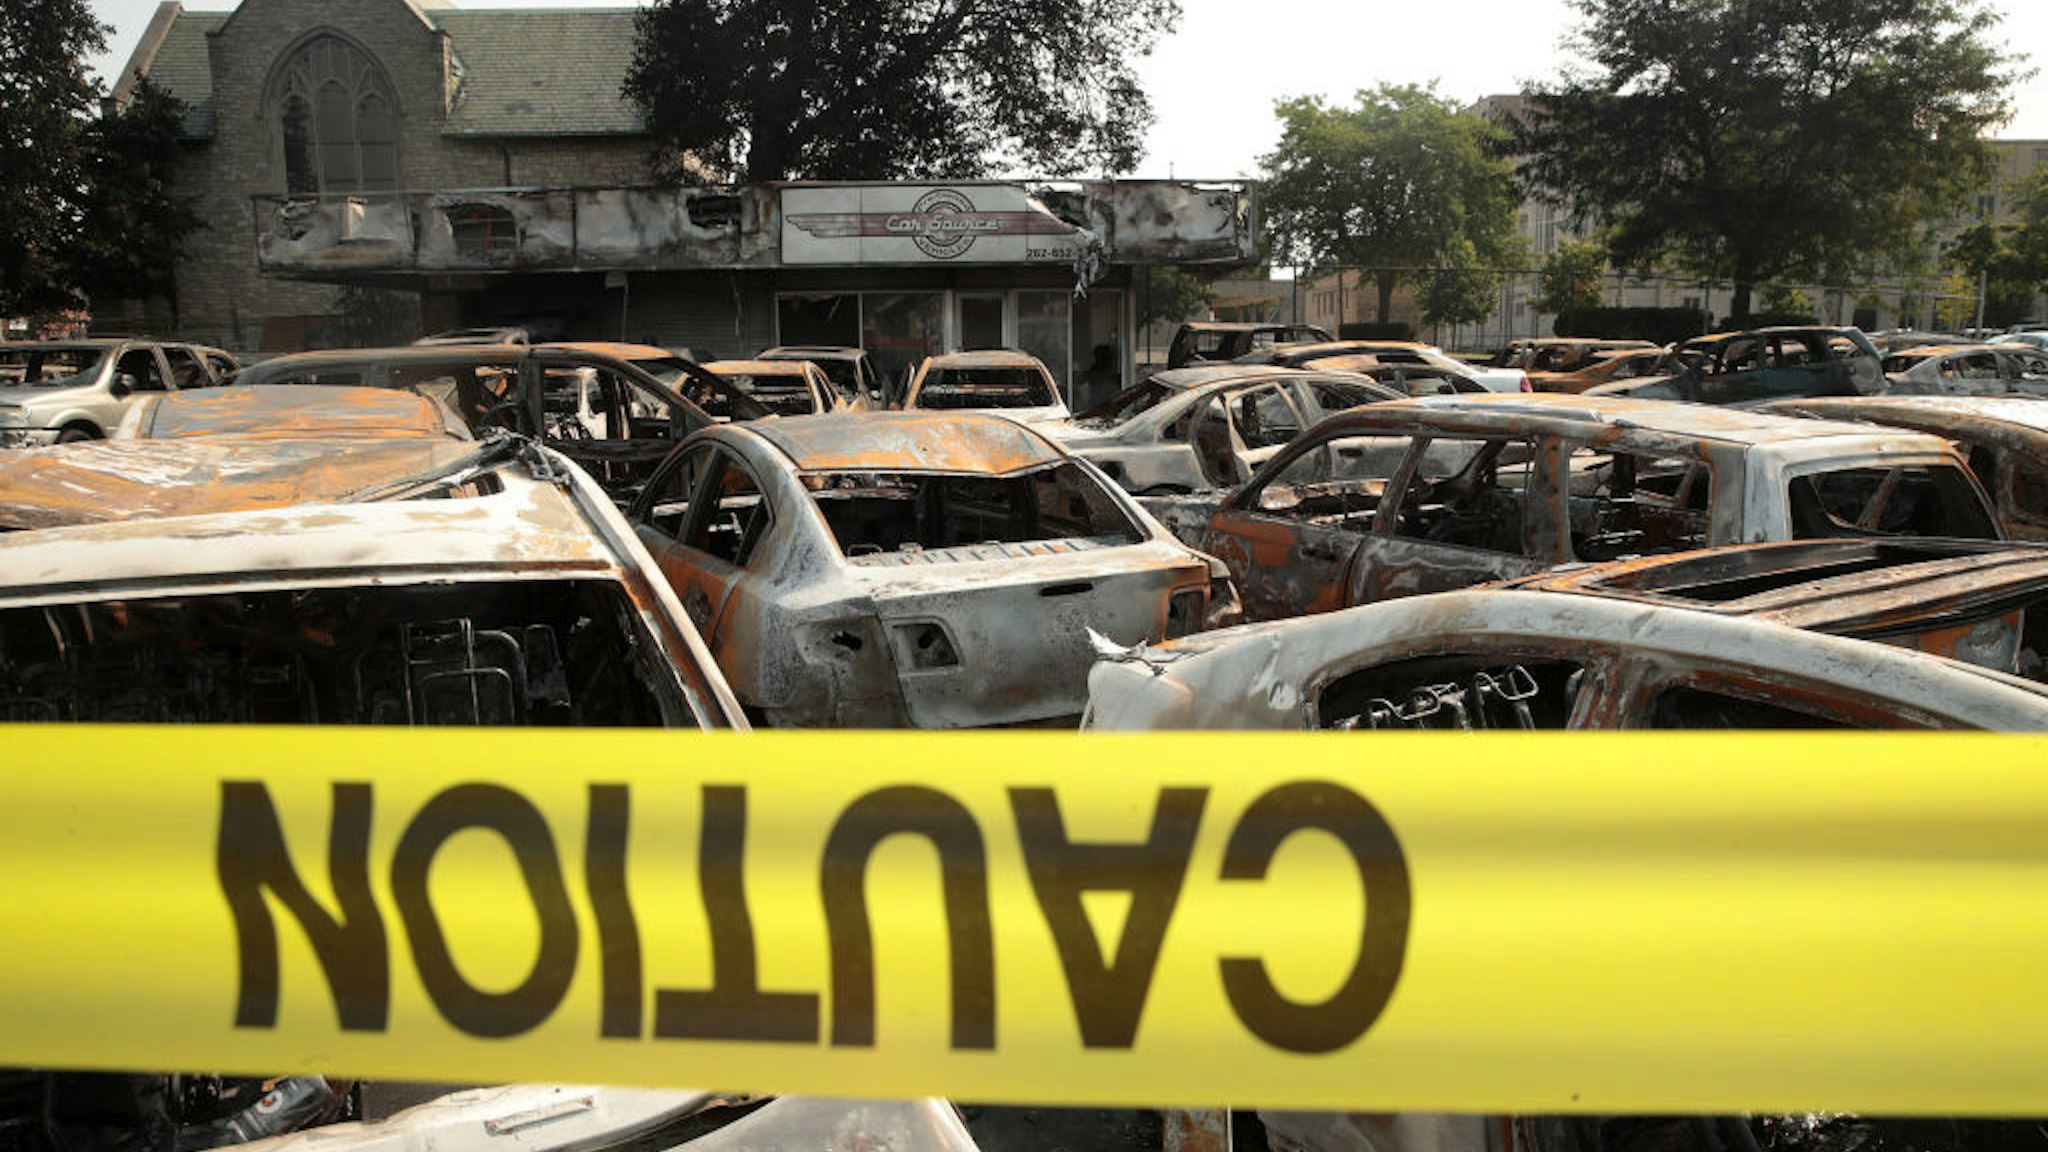 KENOSHA, WISCONSIN - AUGUST 24: Vehicles sit burned out at a used car lot after a night of unrest, on August 24, 2020 in Kenosha, Wisconsin. The unrest stemmed from an incident in which police shot a Black man multiple times in the back as he entered the driver's side door of a vehicle. (Photo by Scott Olson/Getty Images)